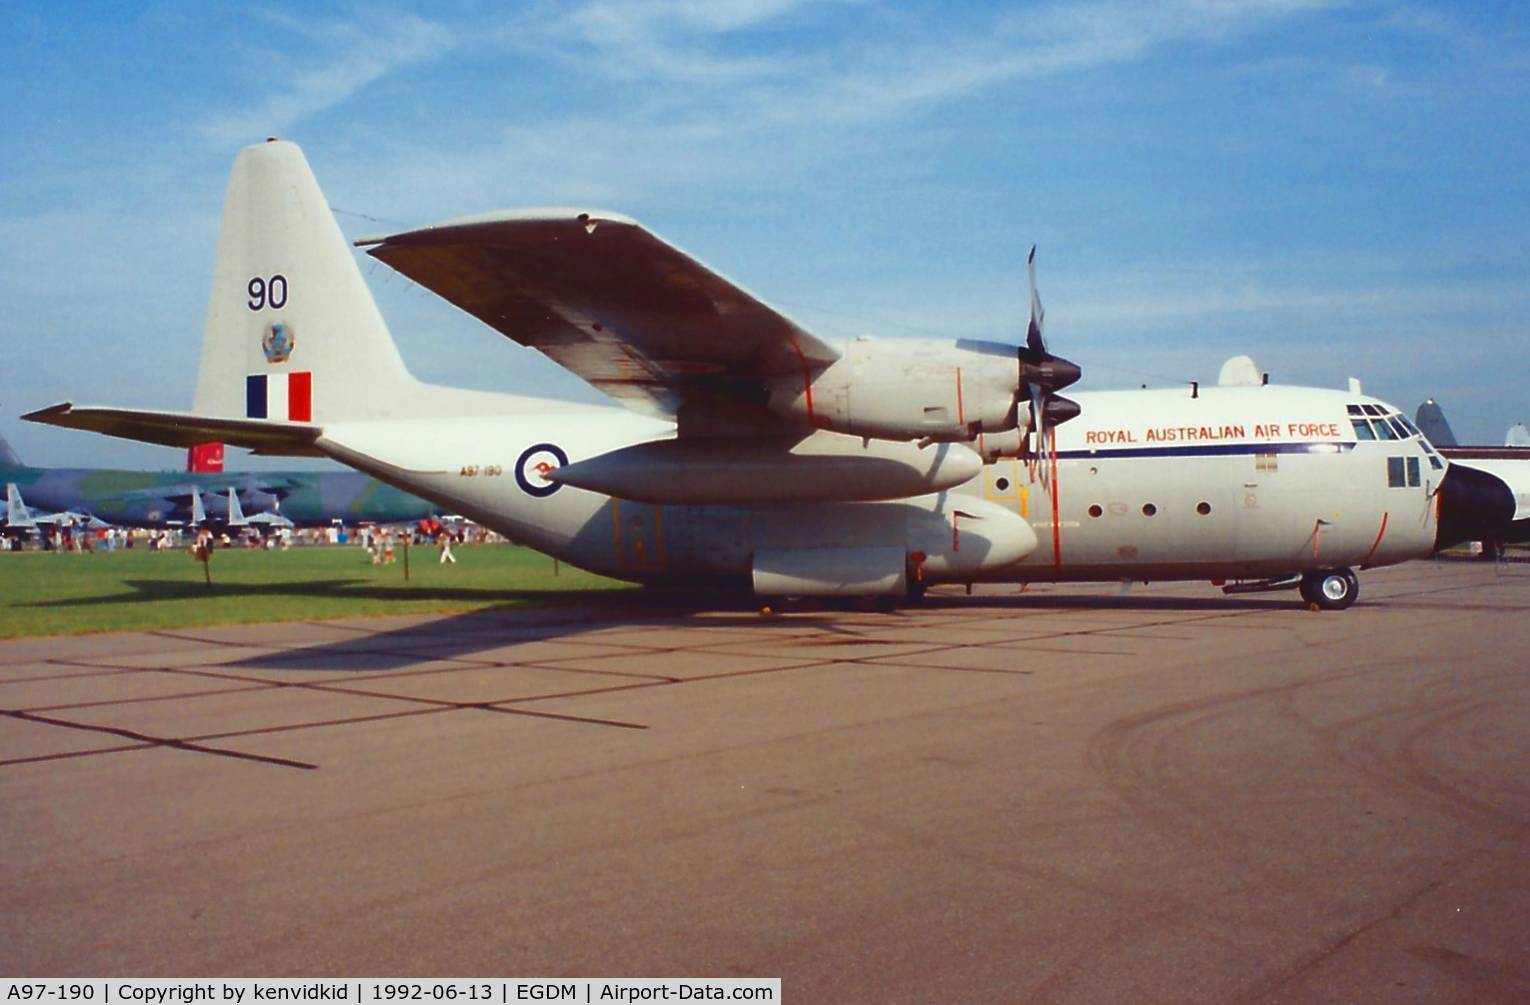 A97-190, 1965 Lockheed C-130E Hercules C/N 382-4190, At Boscombe Down, scanned from print.